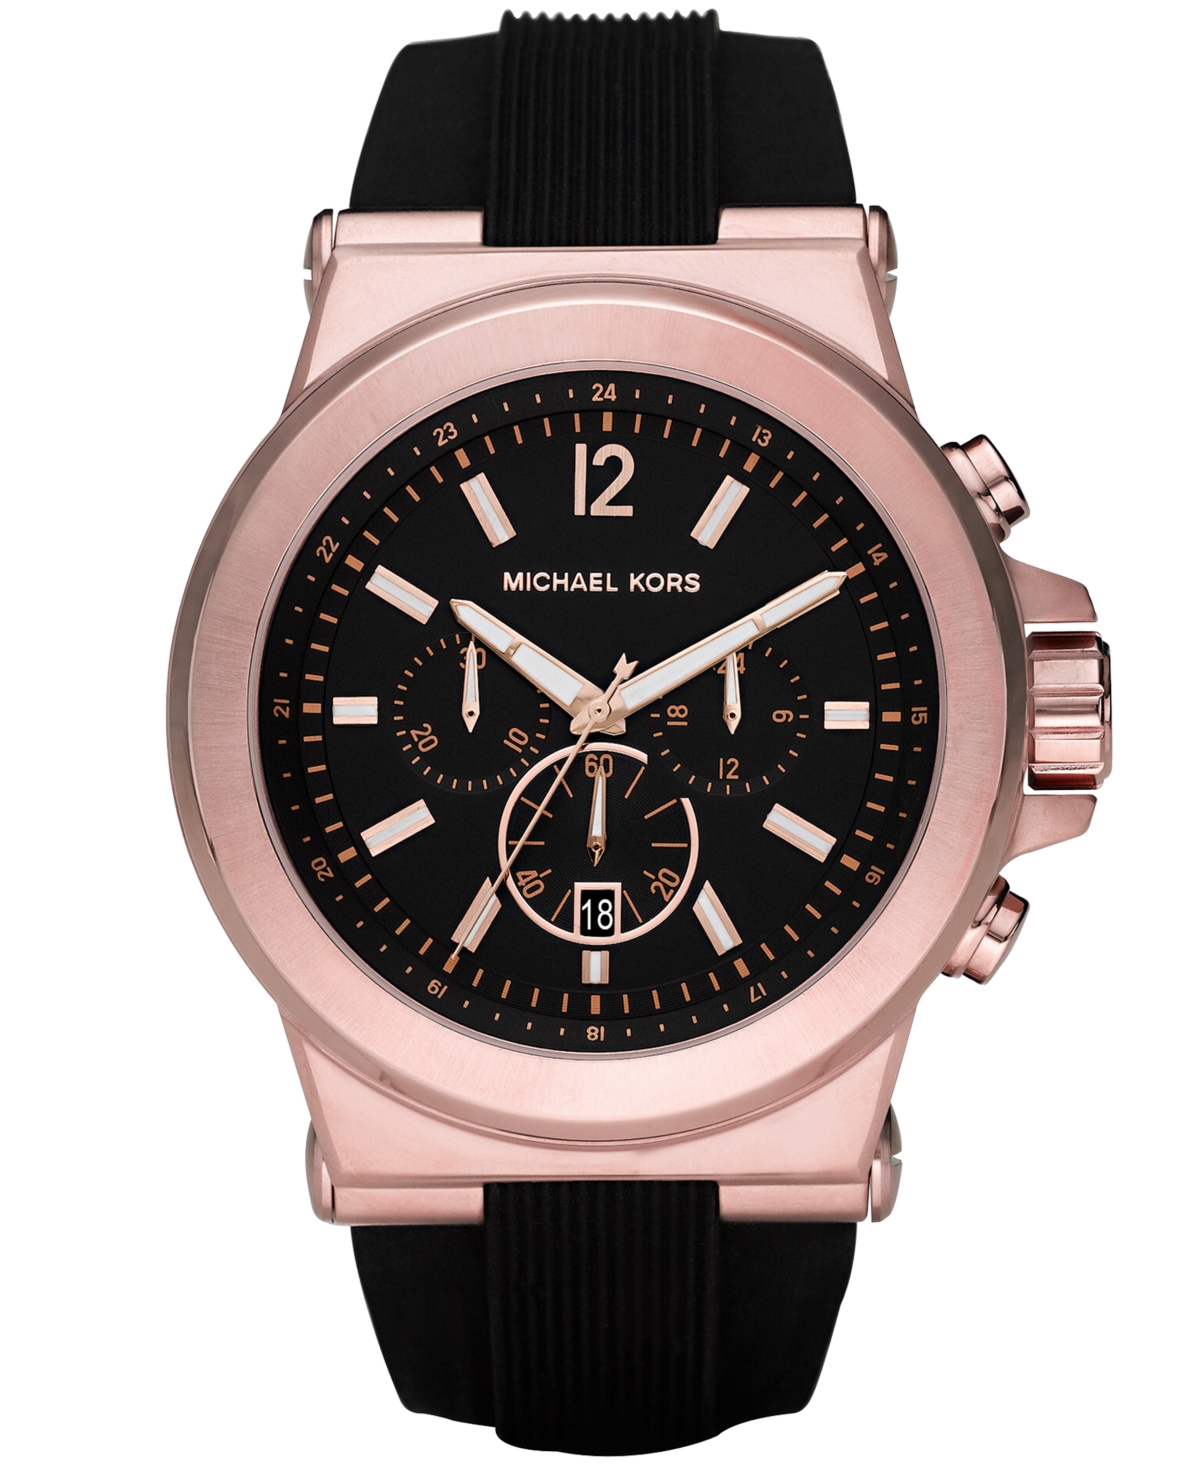 Michael Kors Men's Chronograph Dylan Black Silicone Strap Watch 48mm Mk8184 In No Color